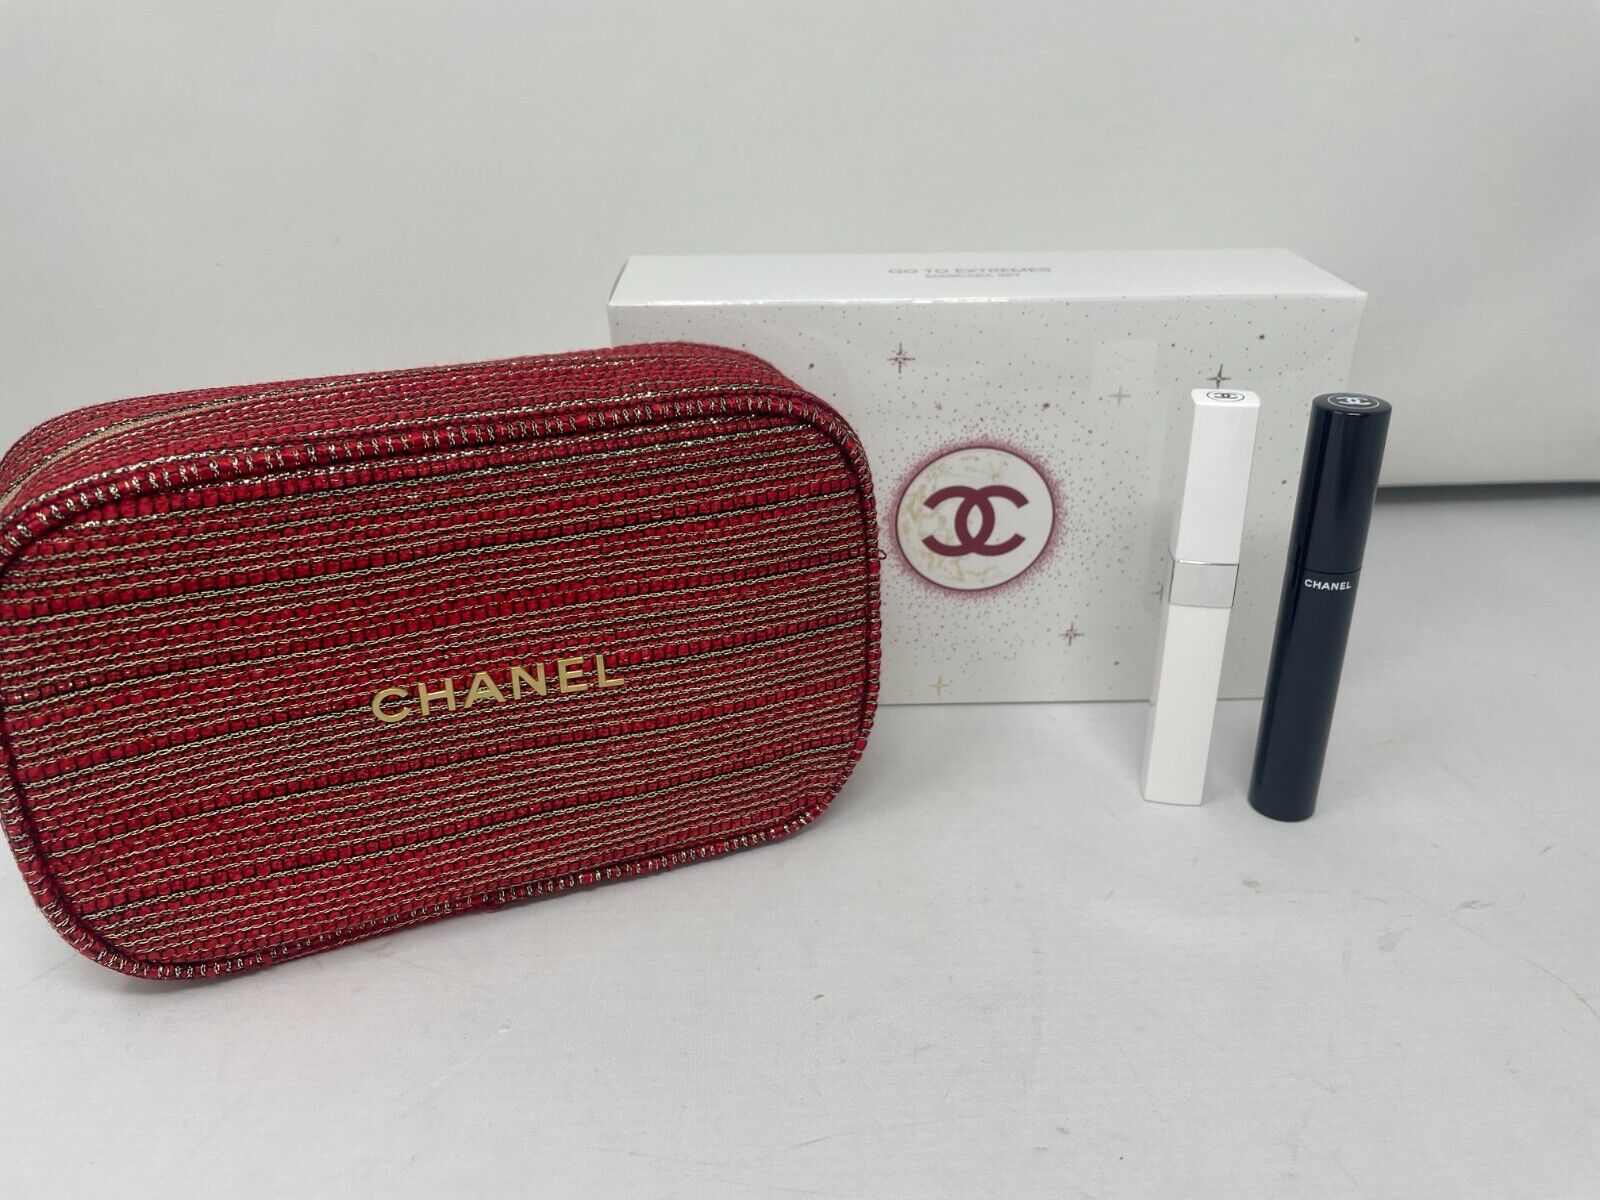 New CHANEL Holiday 2022 Go To Extreme Mascara Primer Gift Set Red Tweed Bag